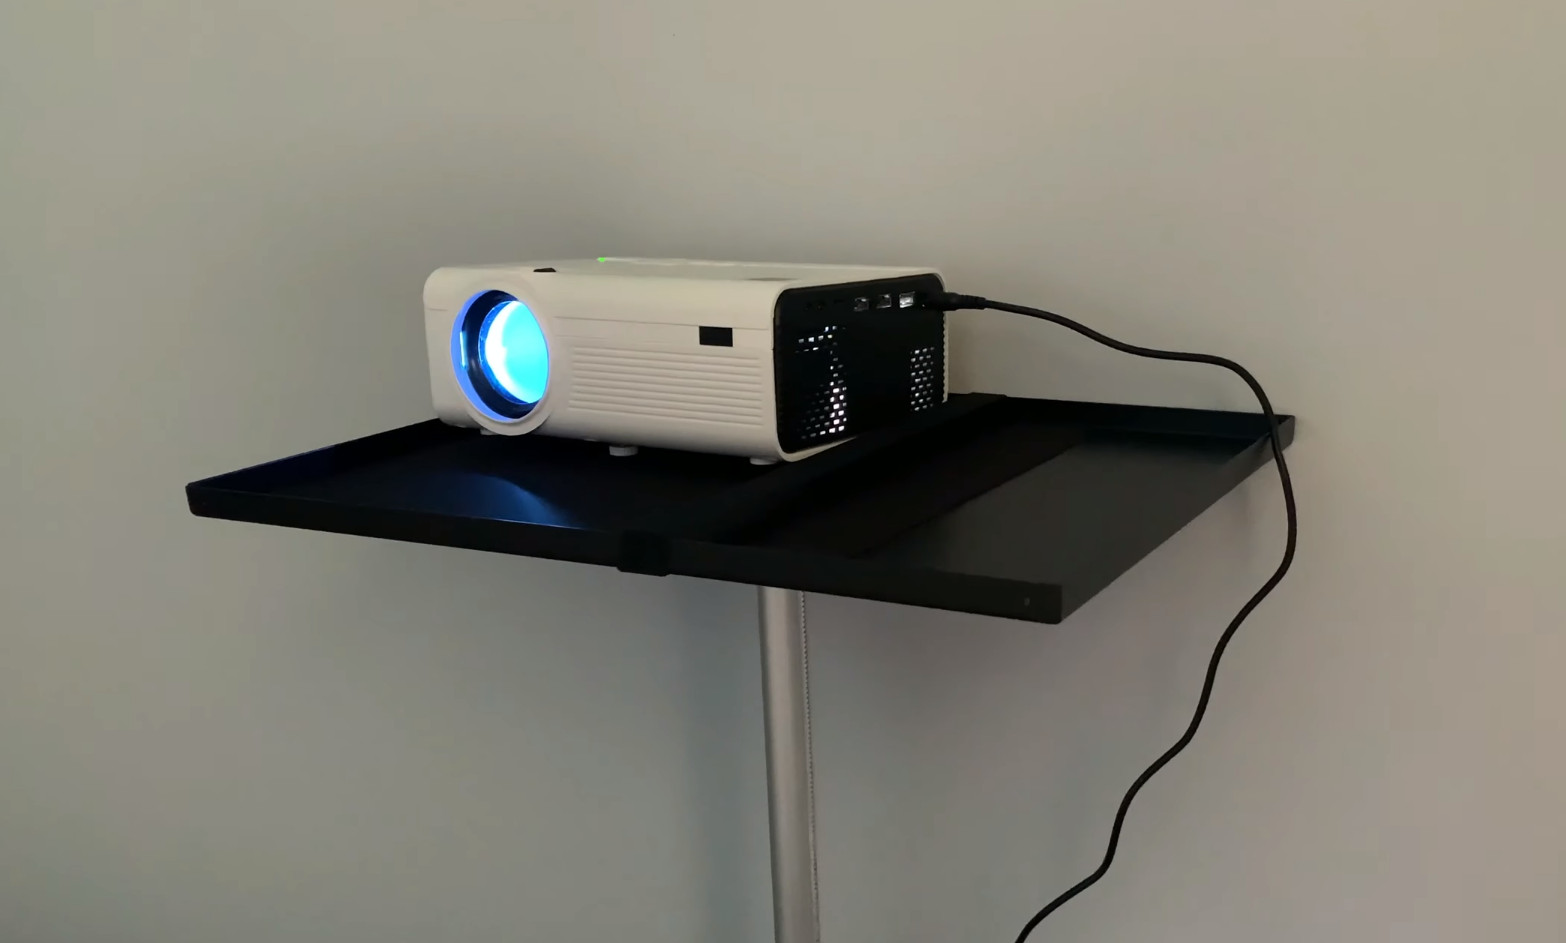 How To Connect A RCA Projector To A Phone